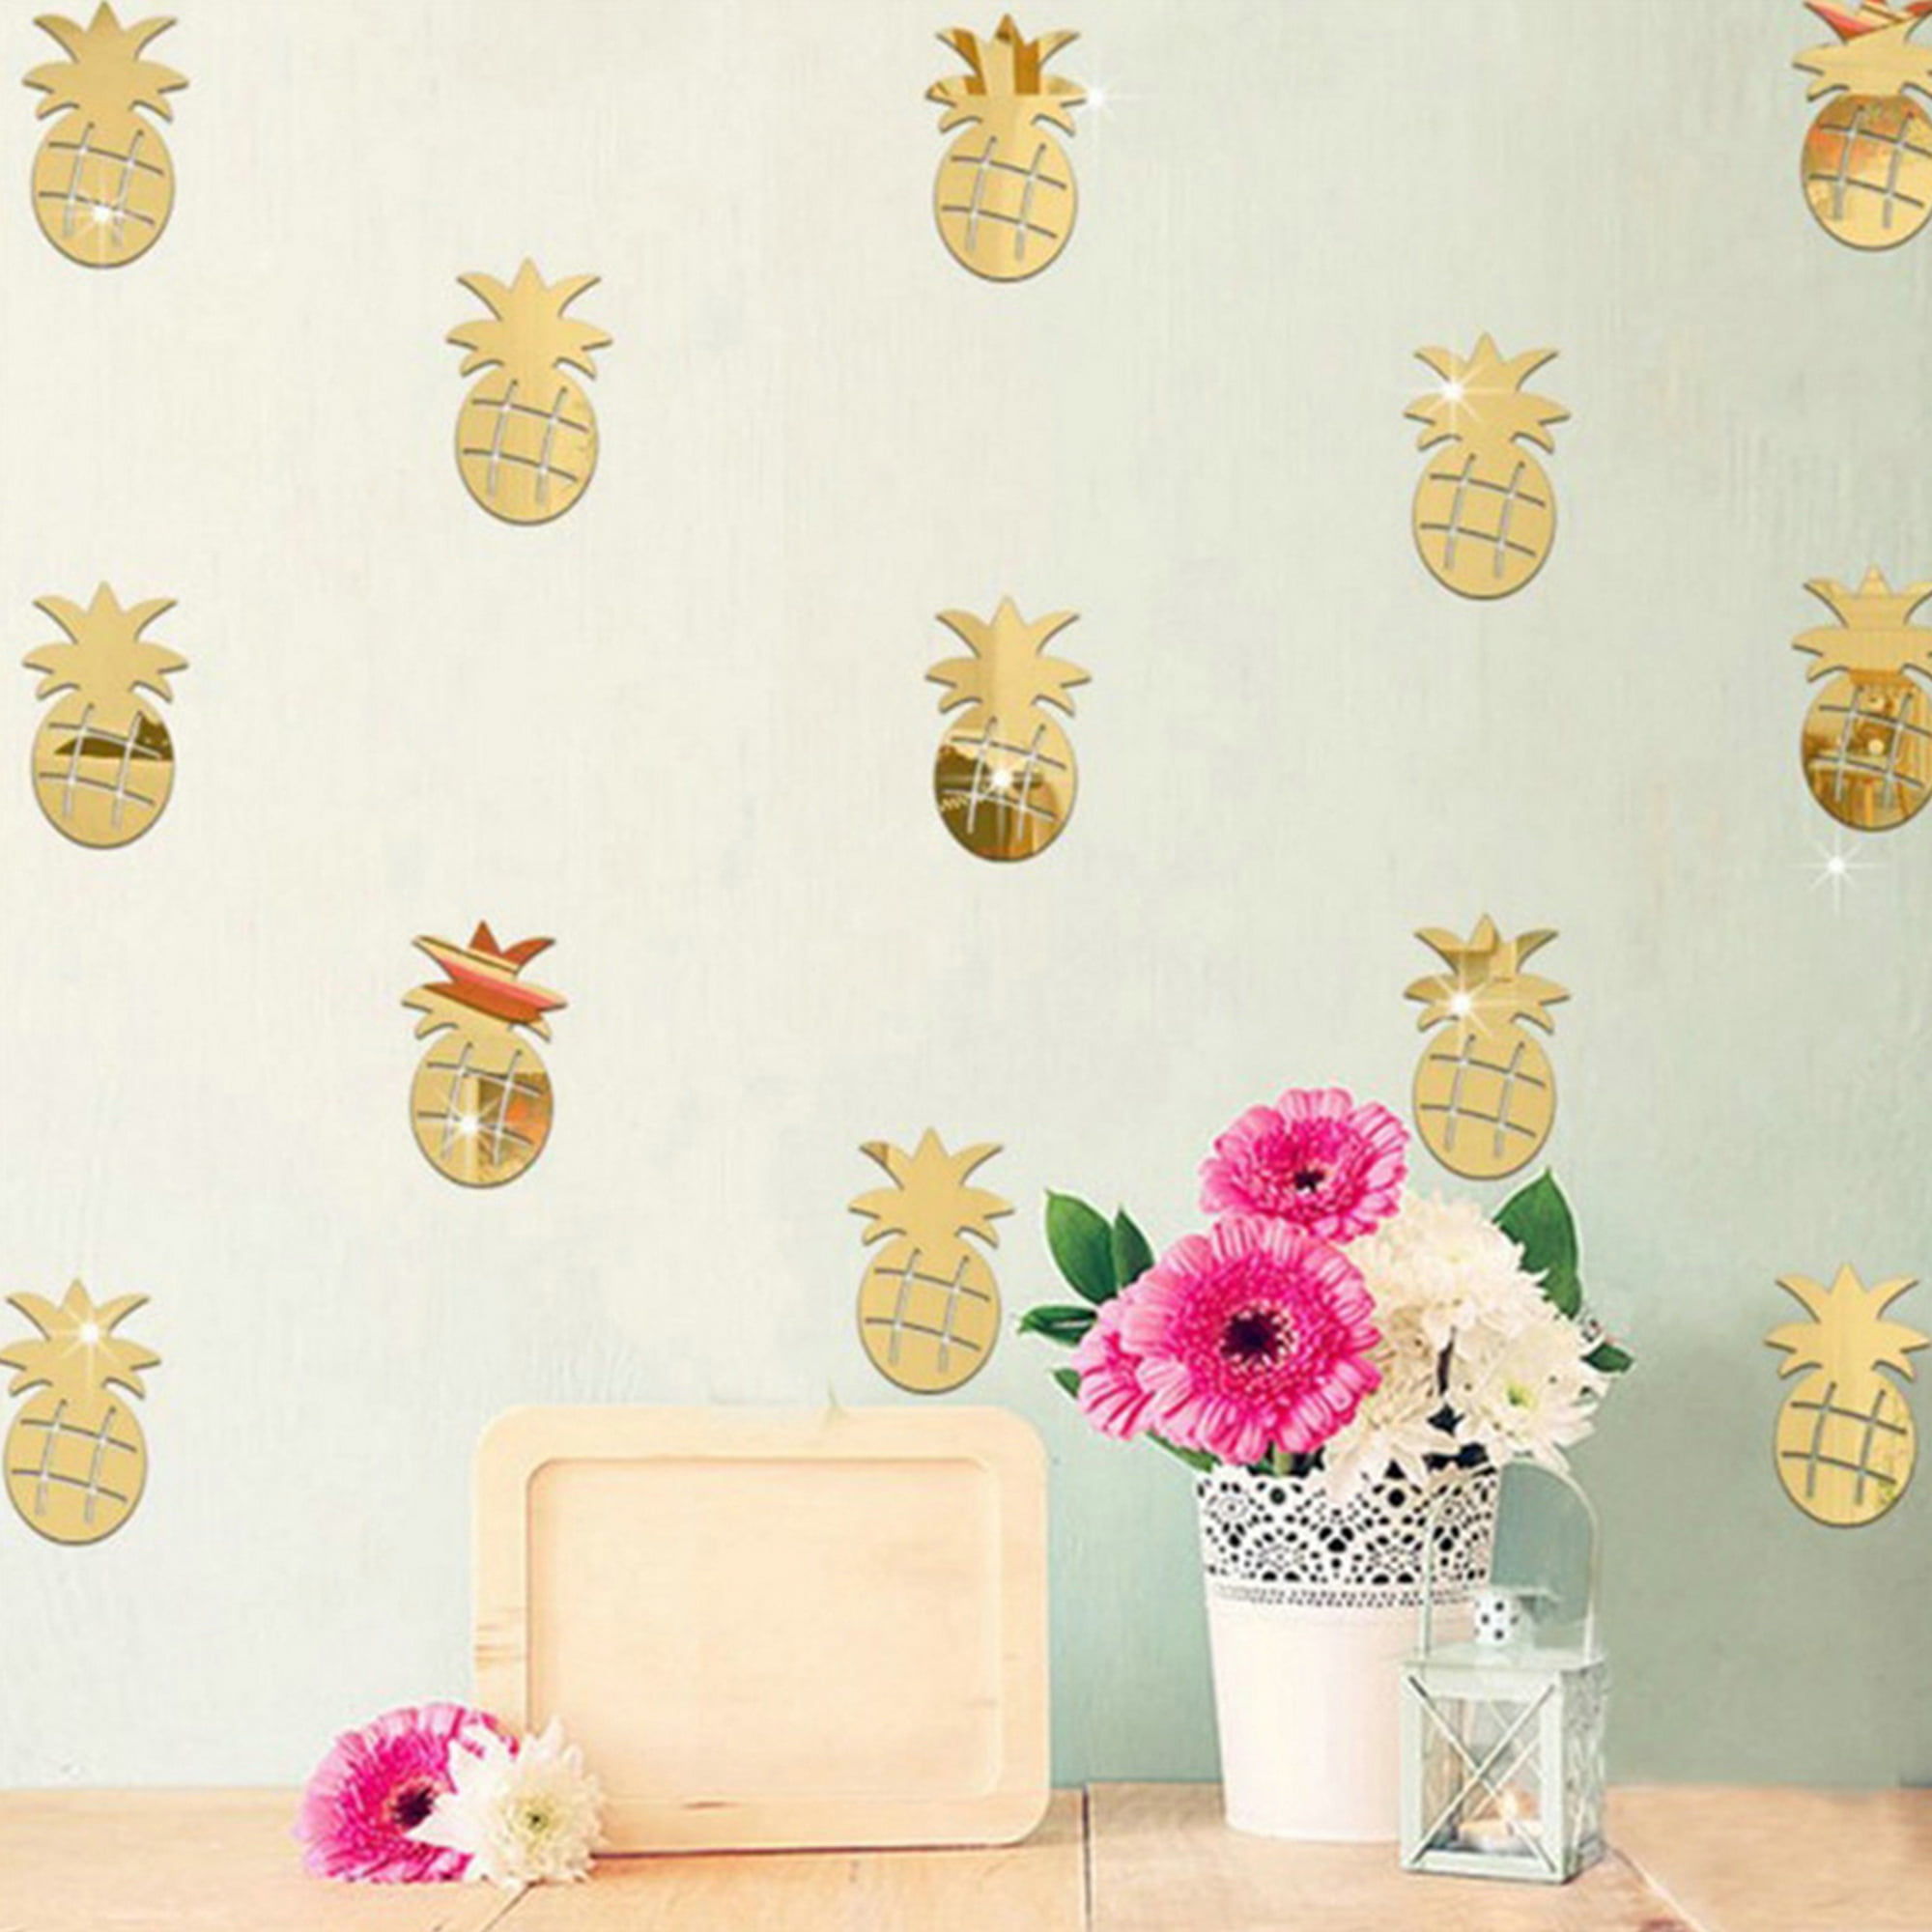 Details about   Pineapple Wall Sticker Art Home Decorations Decor room Bedroom Rose Gold New